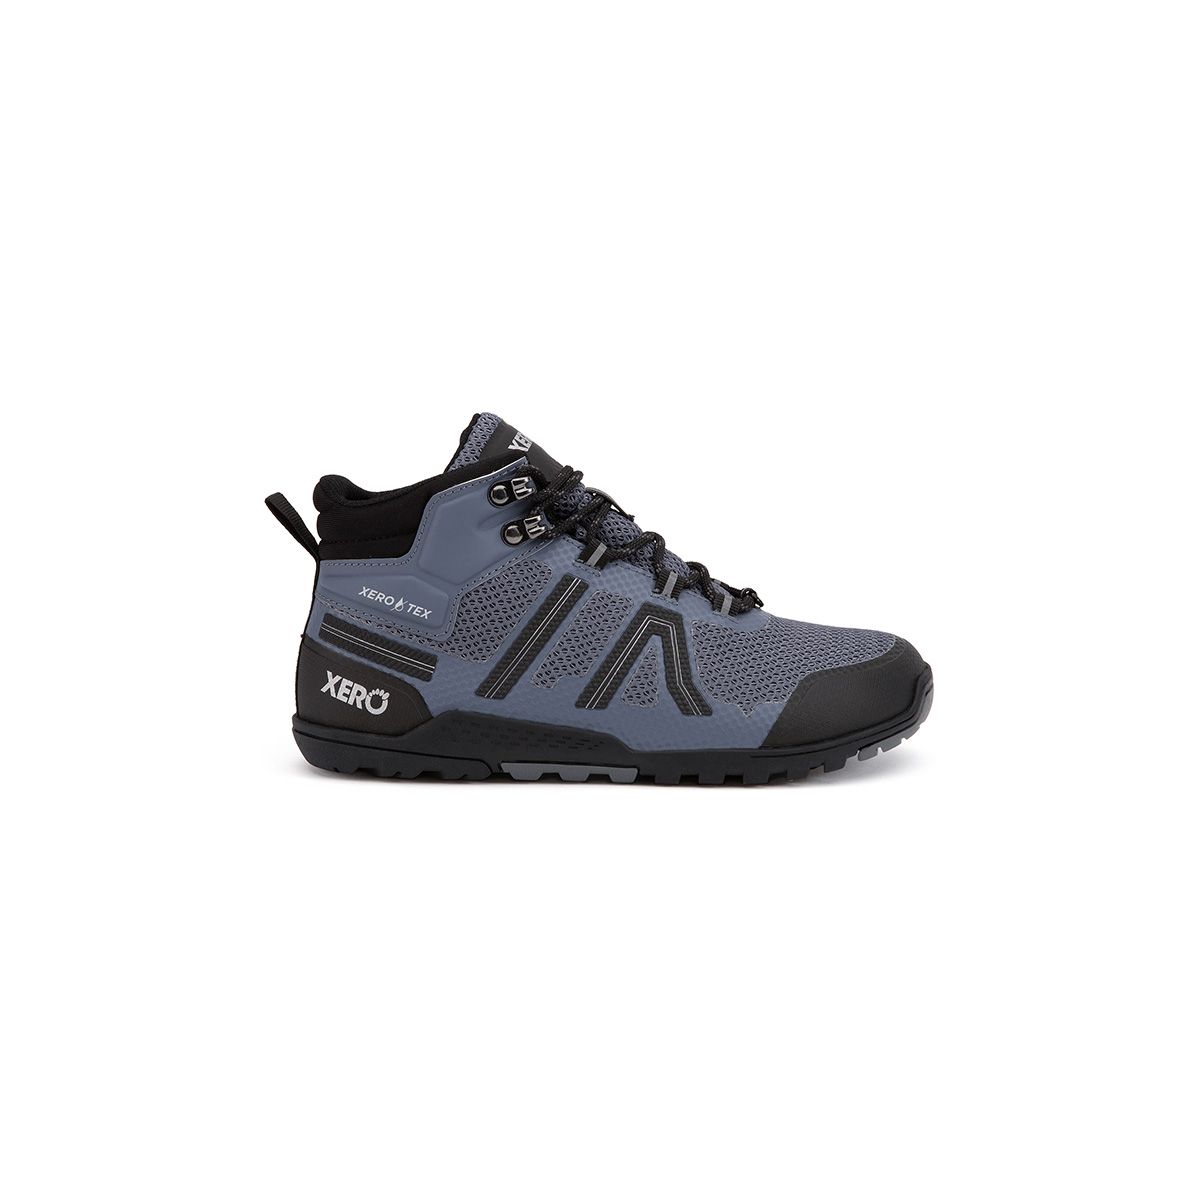 Xero Shoes Xcursion Fusion | Minimalist Trail Running and Hiking Shoe